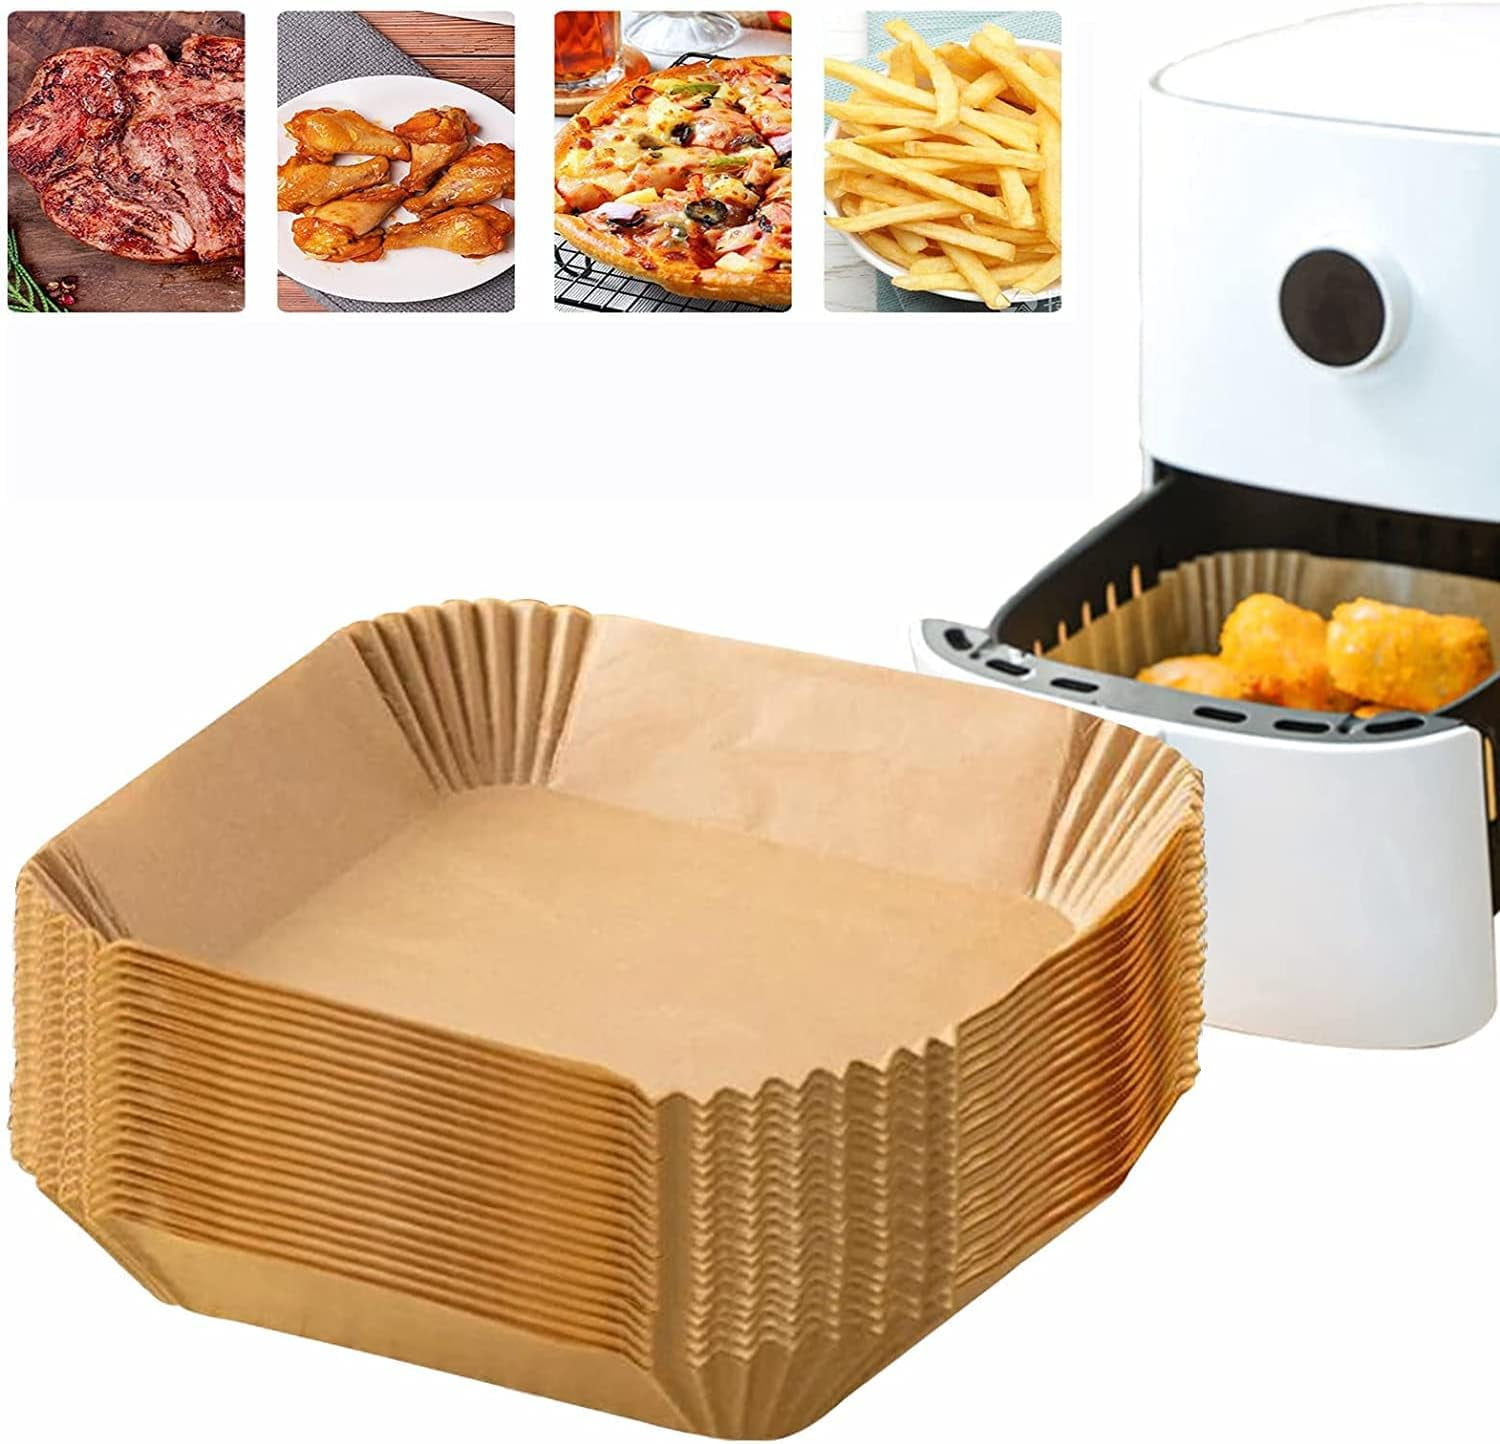 Air Fryer Disposable Paper Liner,16cm Square Non-Stick Parchment Paper for Air Fryer 3 to 5 Quart,Oil-Proof Water-proof Food Grade Baking Paper for